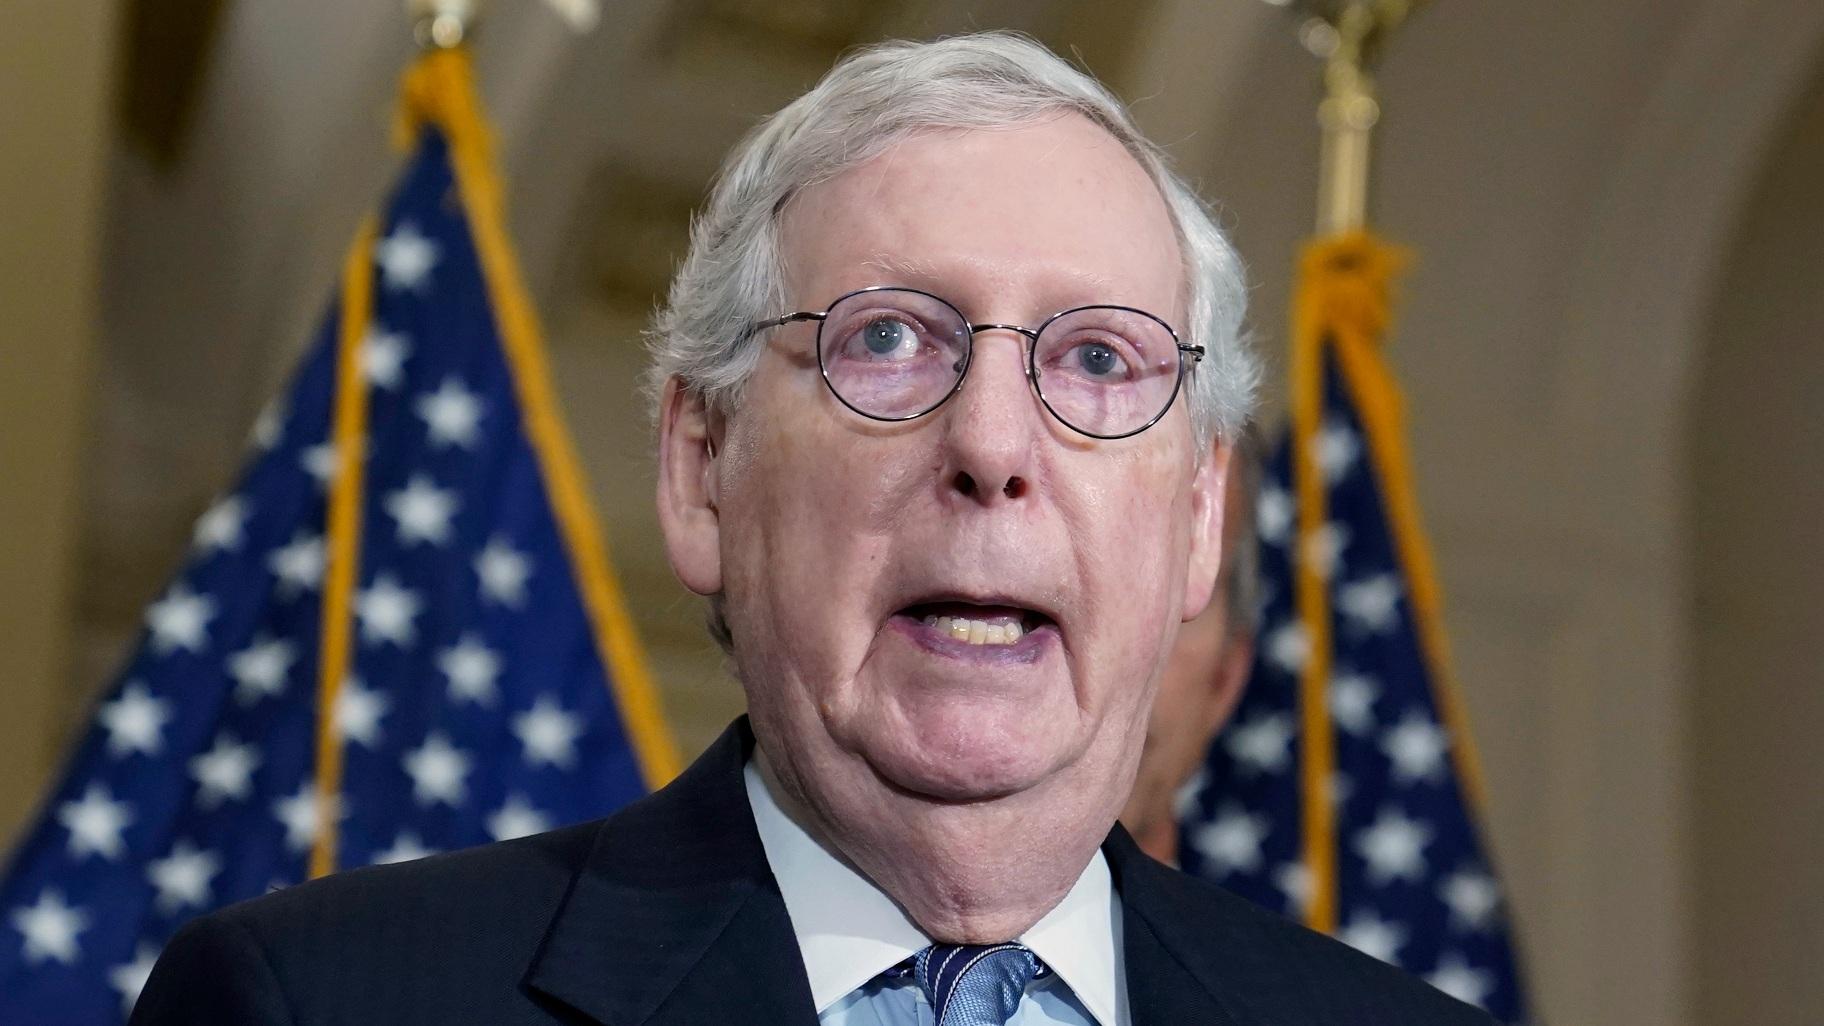 Senate Minority Leader Mitch McConnell, R-Ky., speaks during a news conference Sept. 20, 2022, in Washington. (AP Photo / Mariam Zuhaib, File)